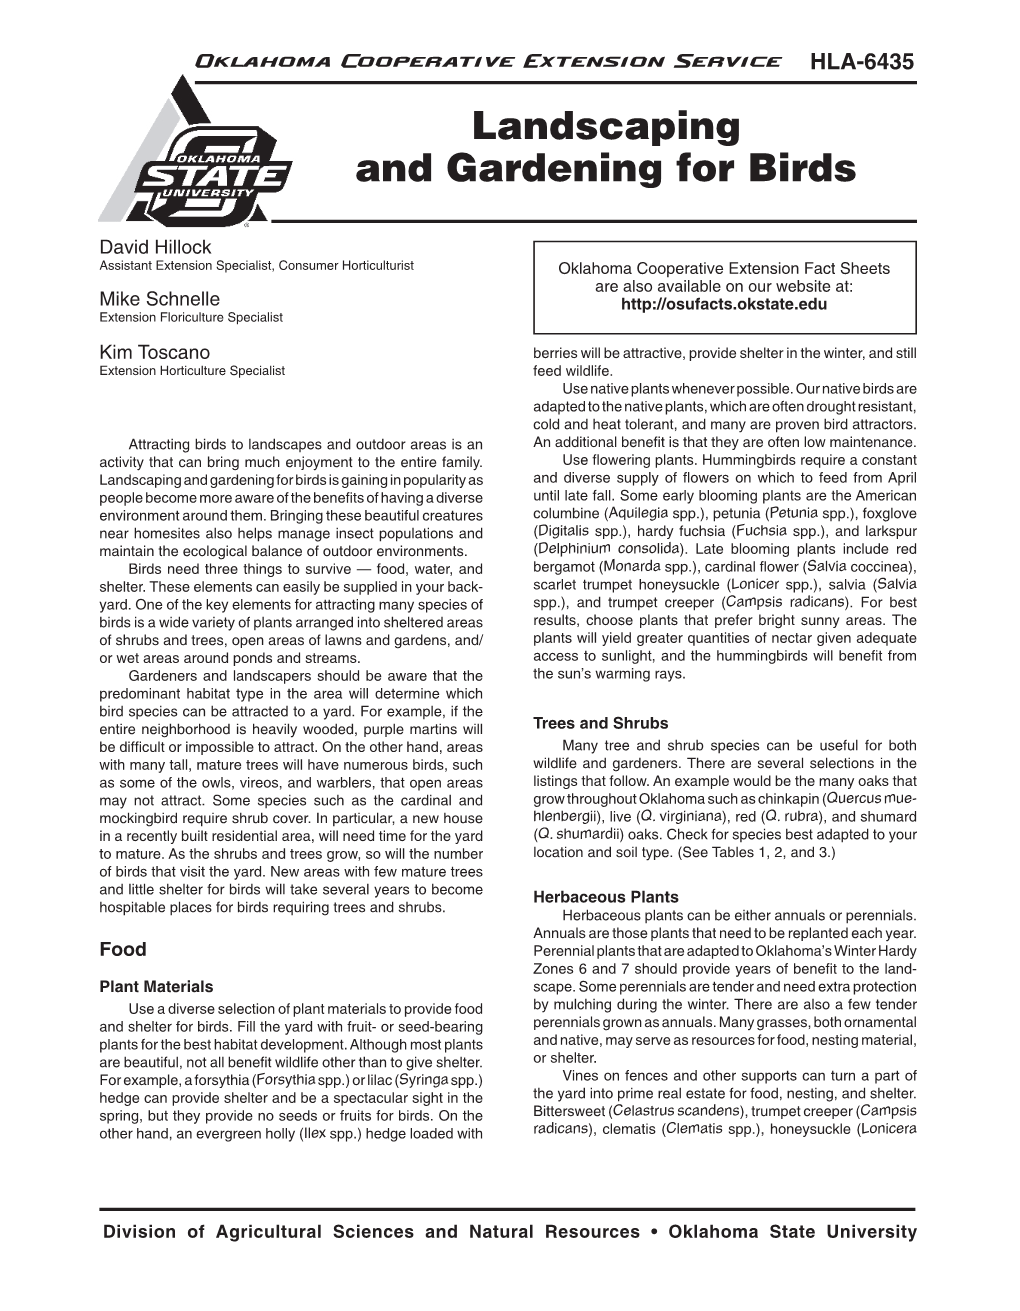 Landscaping and Gardening for Birds